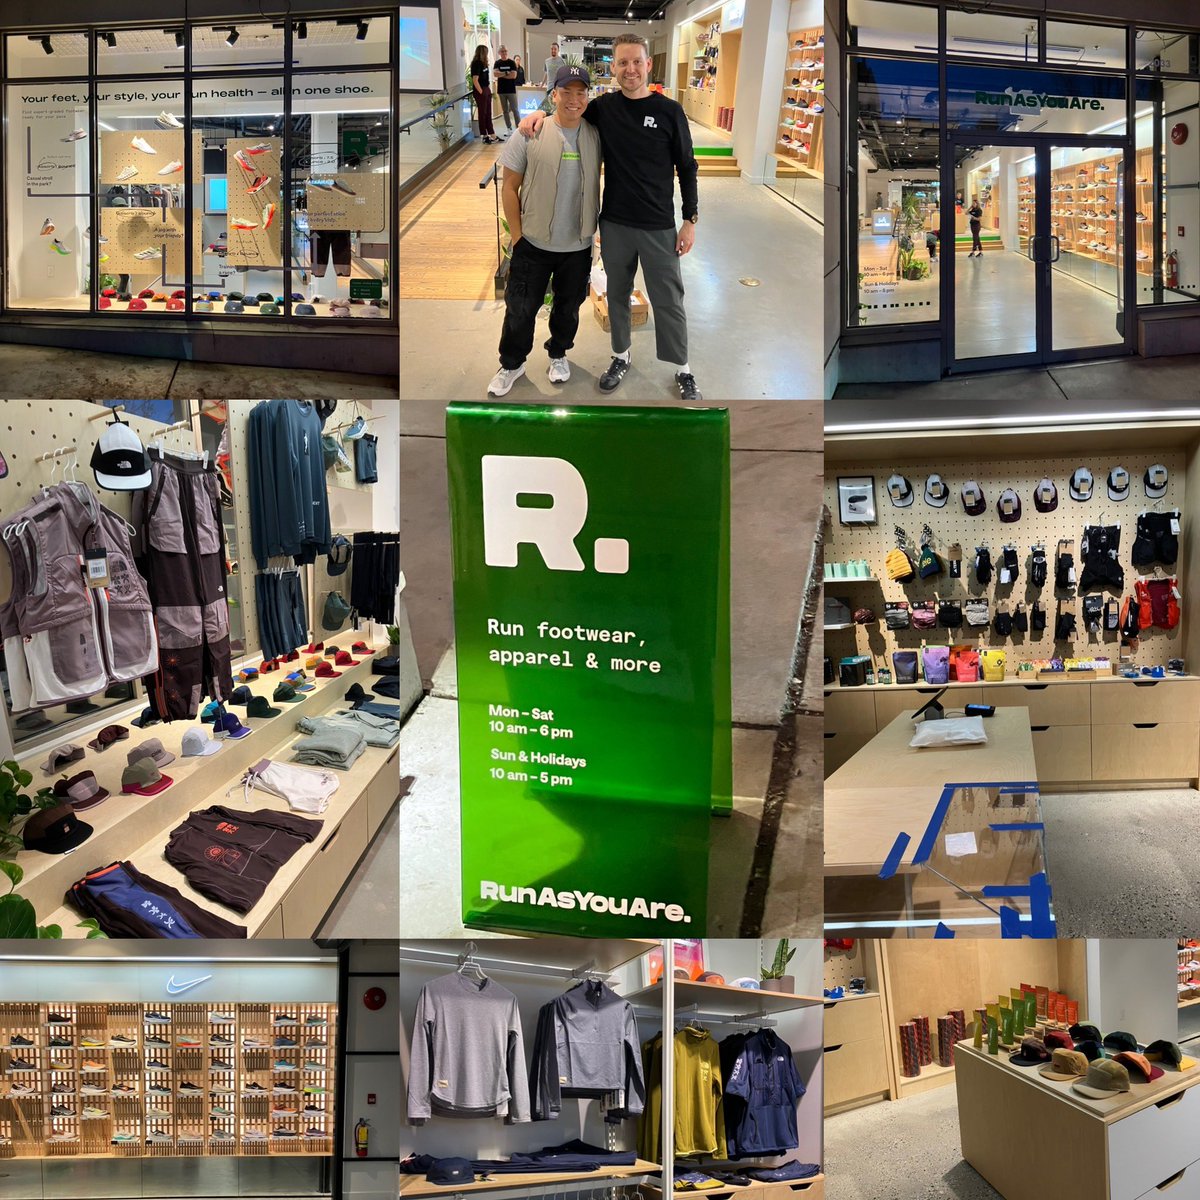 Opening day of the ‘newest’ running store on West 4th in Kitsilano, Run As You Are,appealing to ALL runners! There will be a treadmill area for gait analysis & a physio therapy area! Free group runs will be both Tuesdays & Thursdays! 
#RunAsYouAre #runningstore #kits #west4th